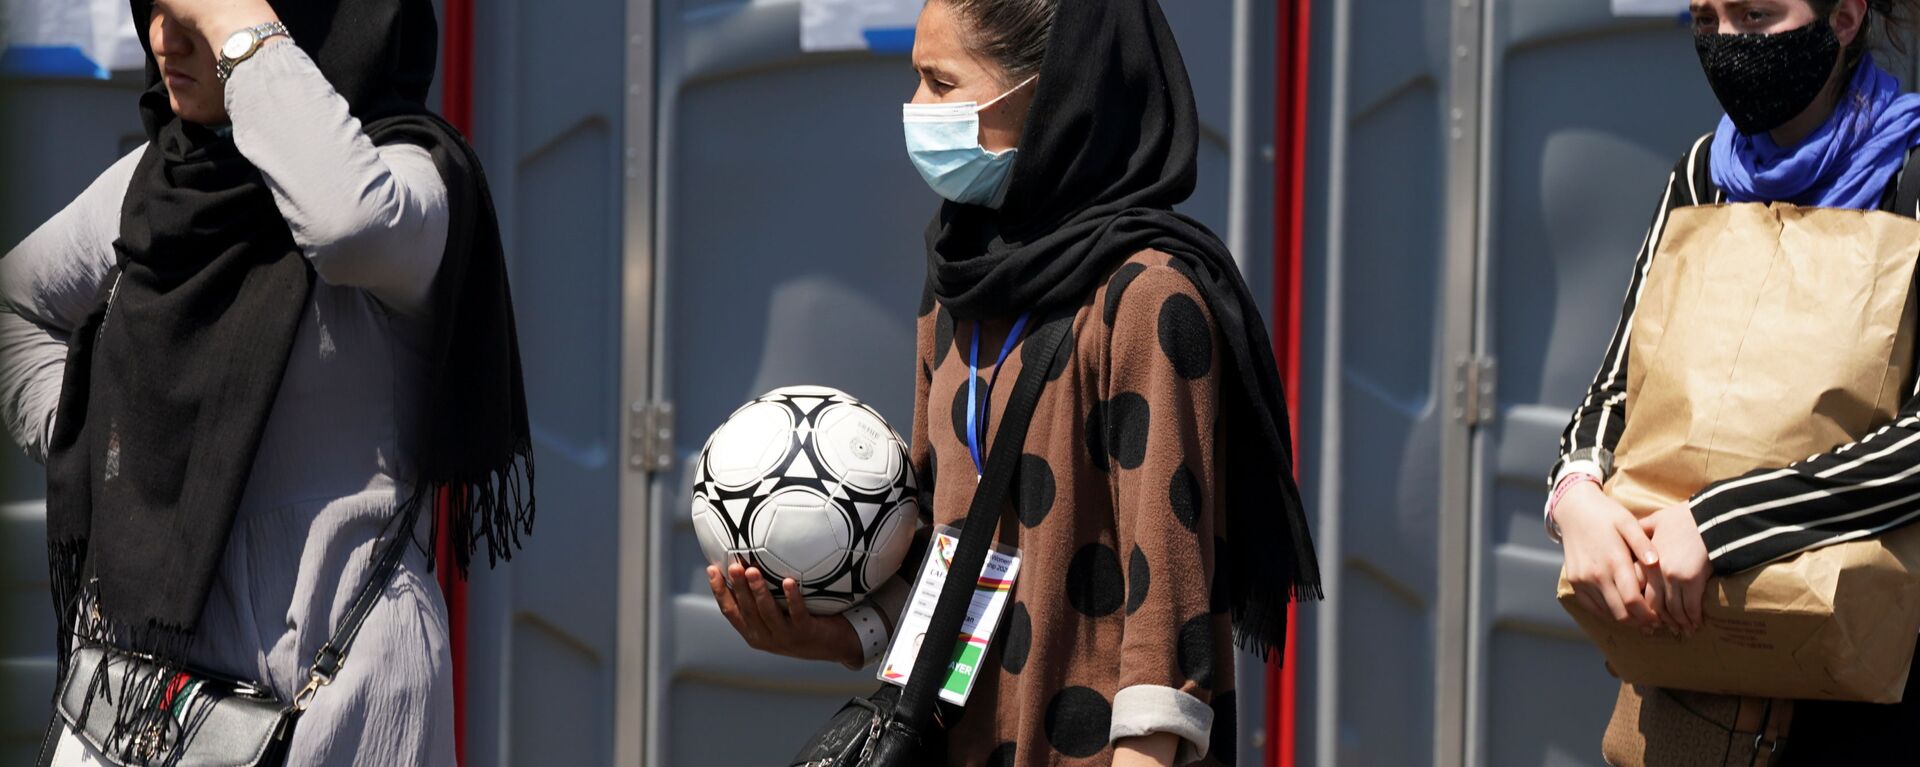 An Afghan woman holding a soccer ball and wearing a CAFA (Central Asian Football Association) credential, waits in line at a processing center for refugees evacuated from Afghanistan at the Dulles Expo Center near Dulles International Airport in Chantilly, Virginia, U.S., August 24, 2021 - Sputnik International, 1920, 15.09.2021